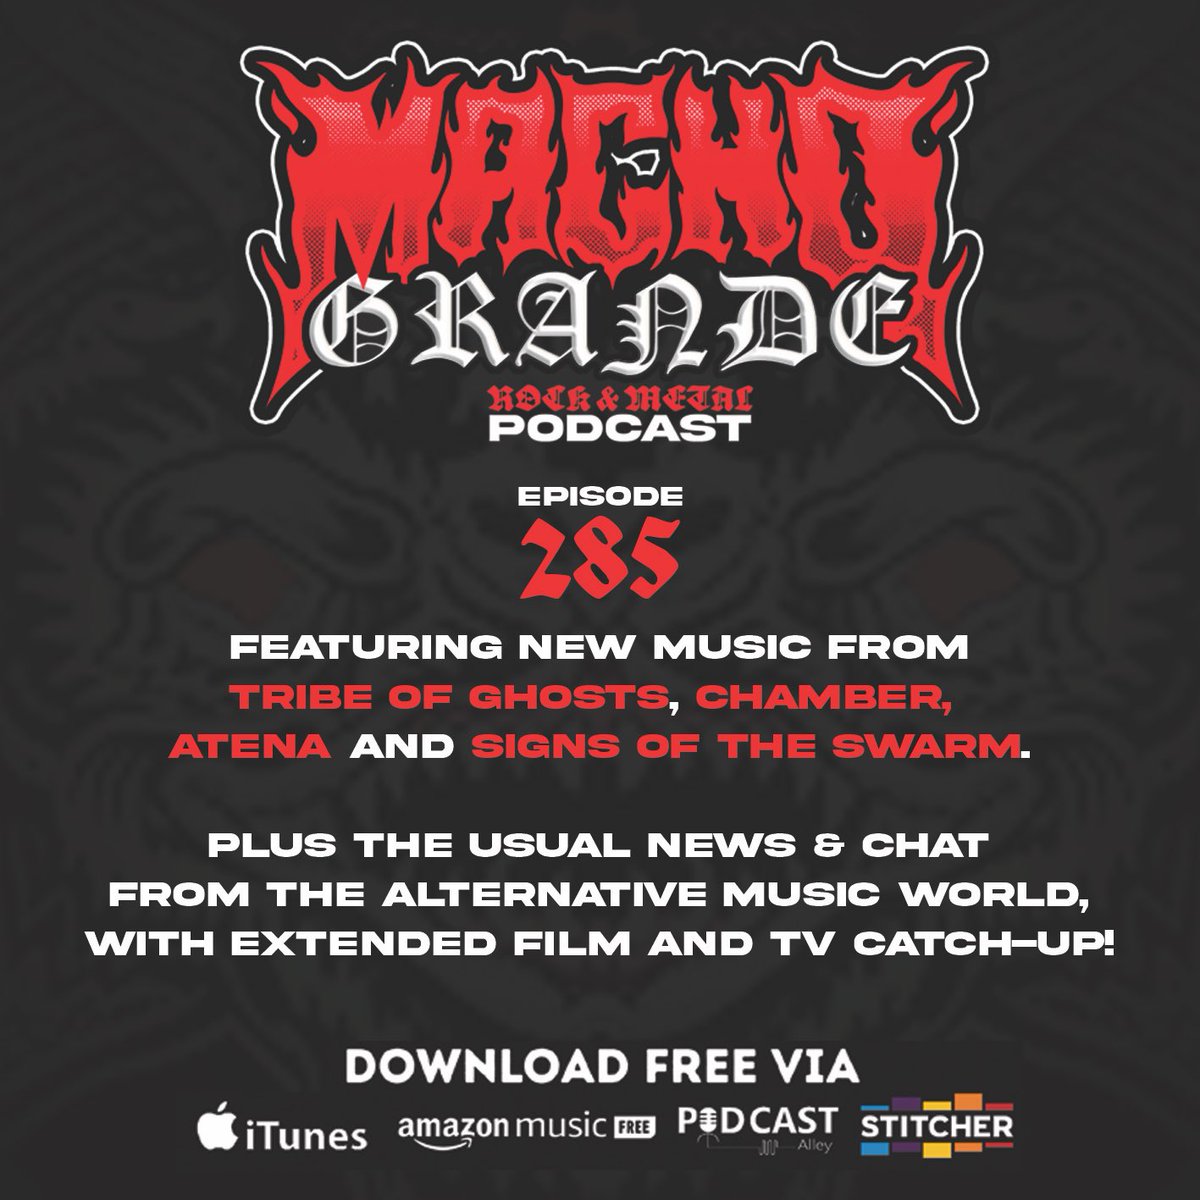 NEW PODCAST ONLINE NOW!

Episode 285 eatures brand new music from @tribeofghostsuk, @chamber615,
@atenaband & @signsoftheswarm!

And if that wasn't enough we cover recent rock news & film/TV chat!

Download free via all podcast networks!

podcasts.apple.com/gb/podcast/mac…